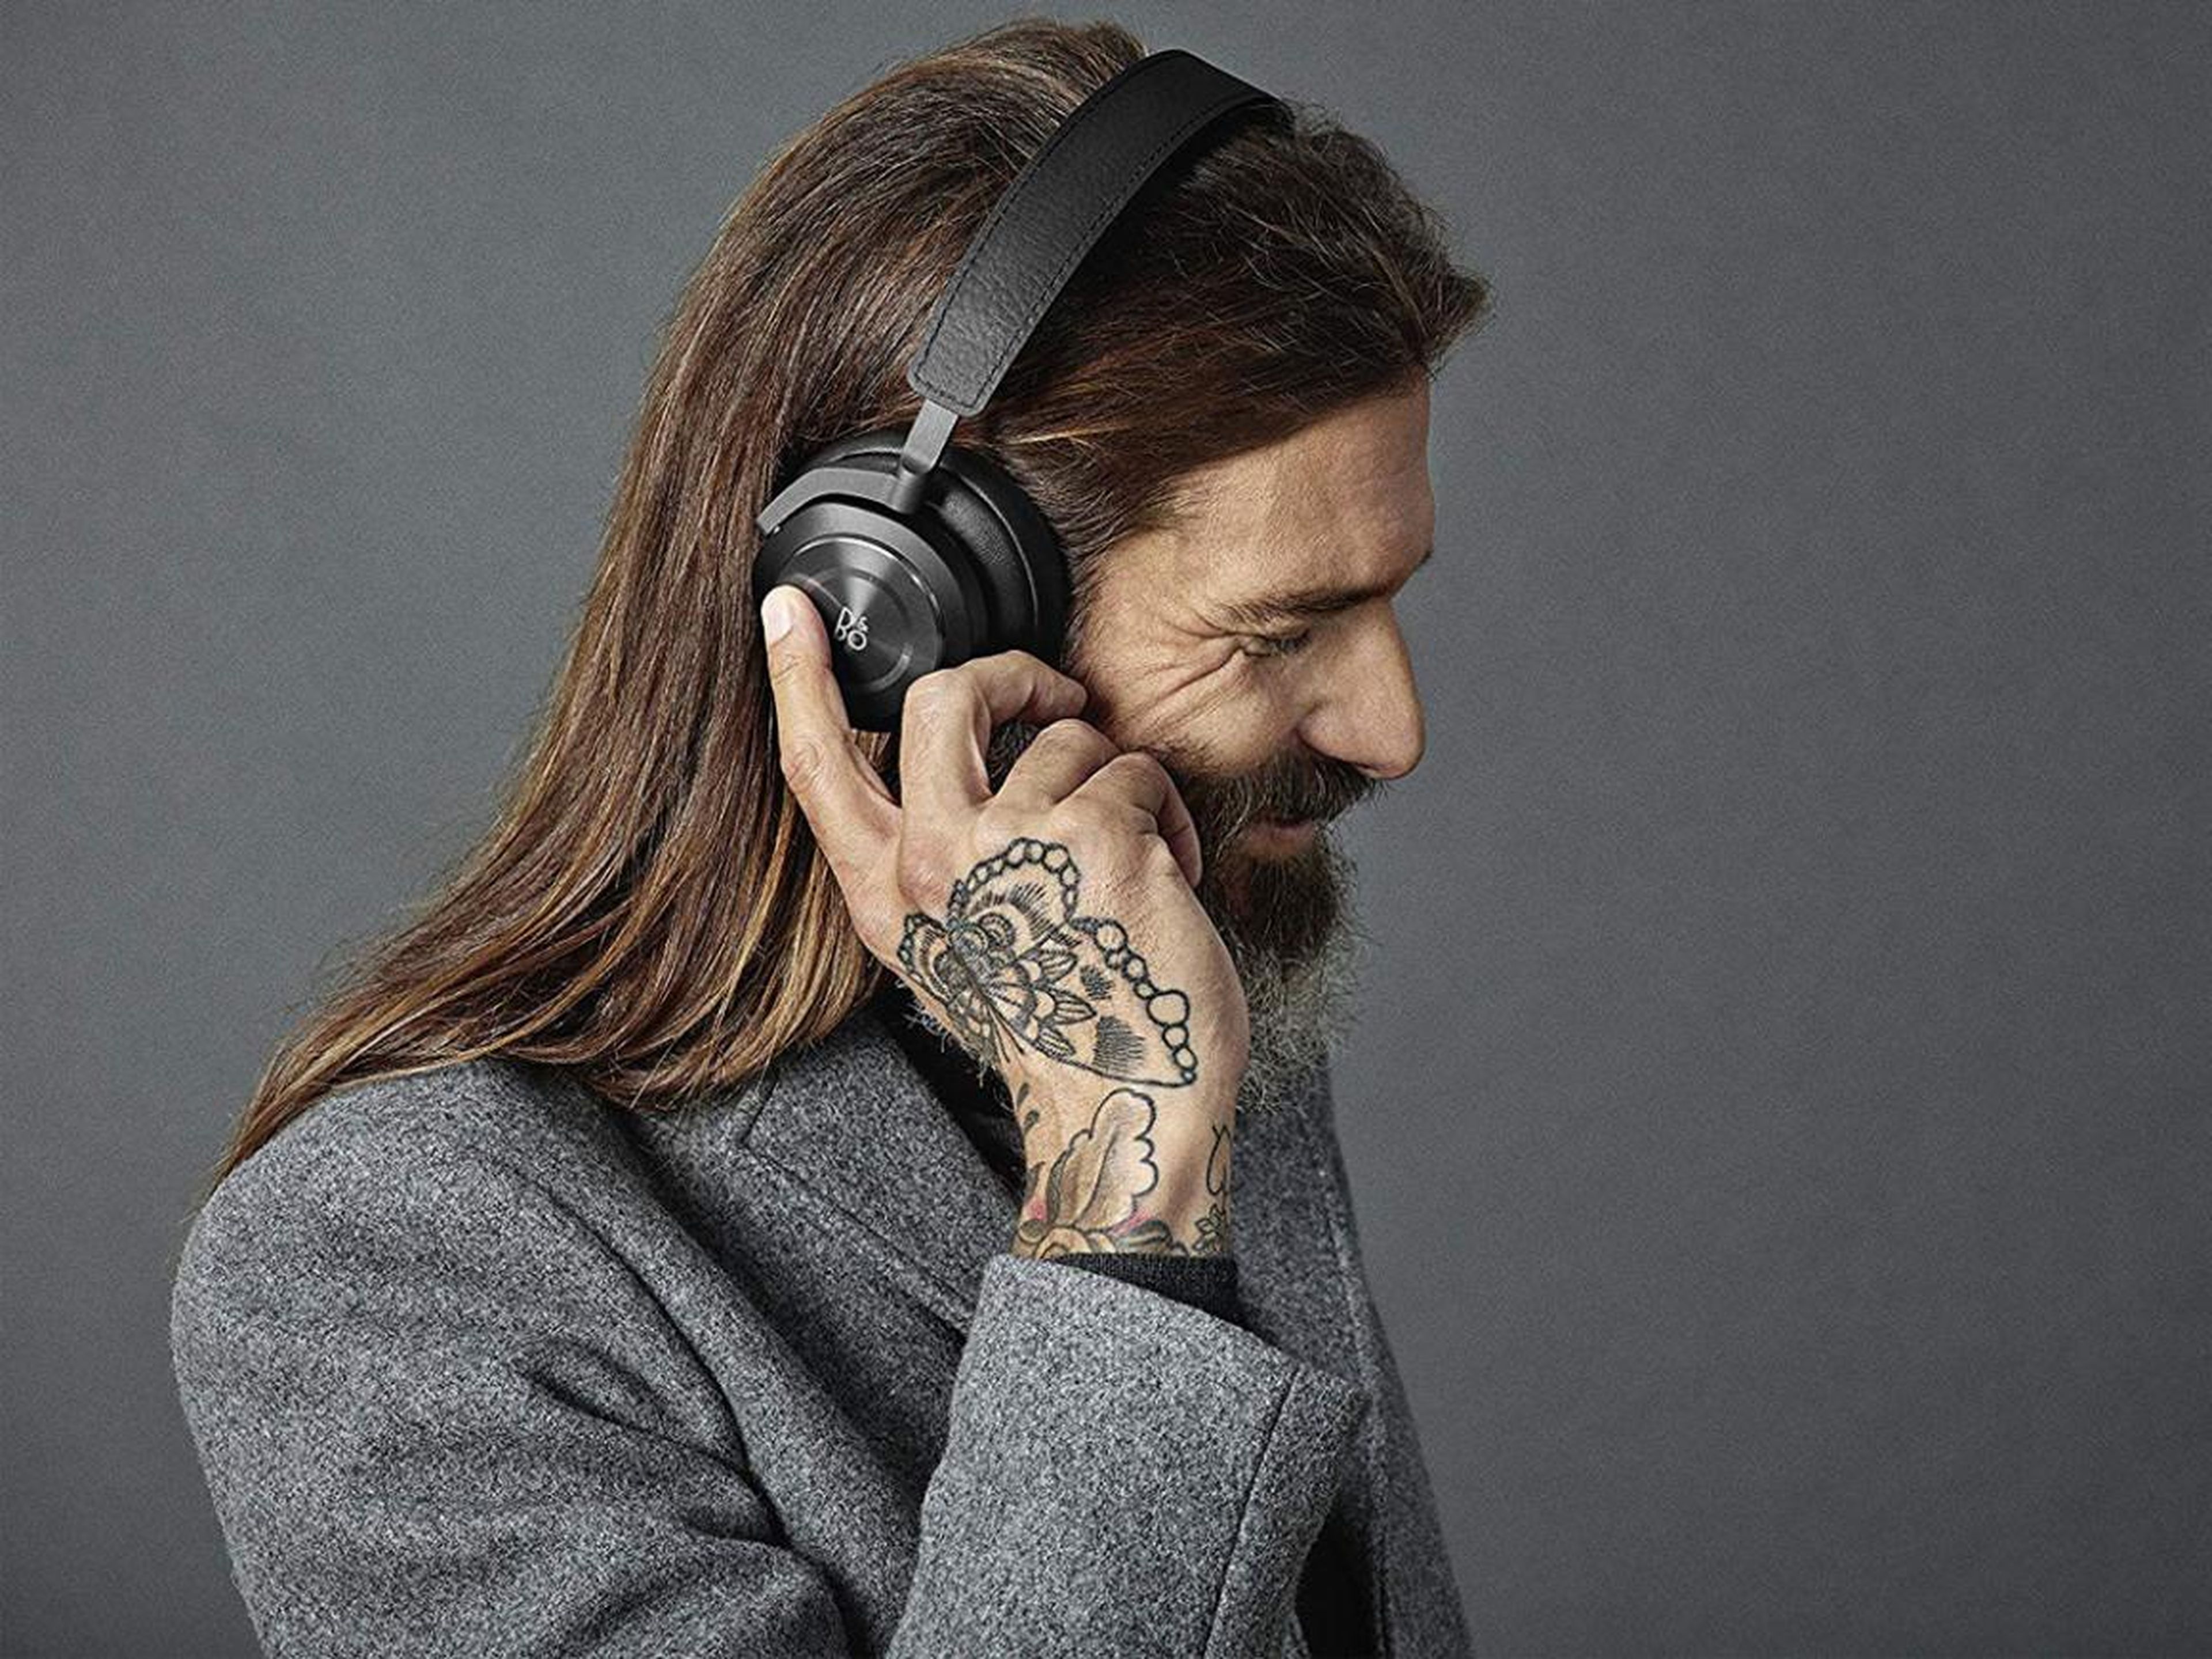 I've been using Bang & Olufsen's $350 noise-cancelling headphones for months, and I've officially determined they're my favorite pair